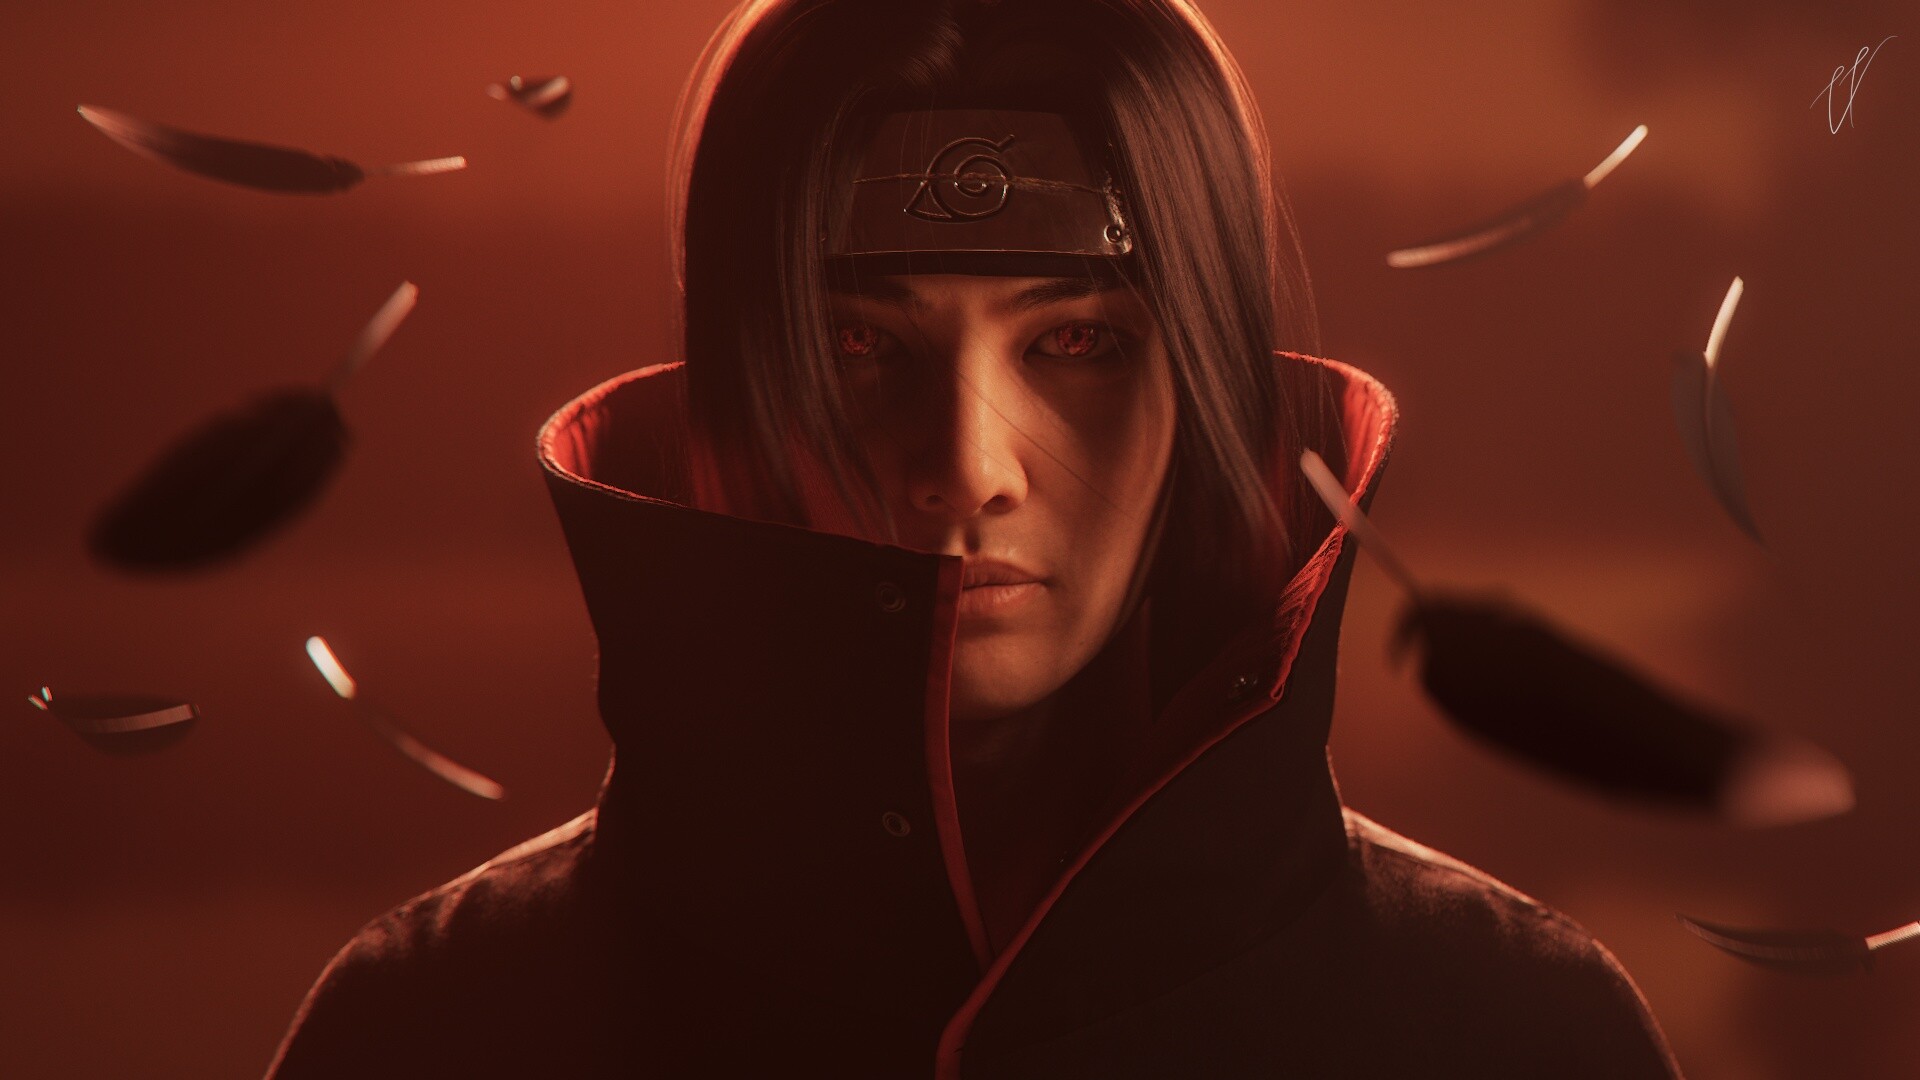 4k Itachi Wallpaper Desktop iPhone and Android  The RamenSwag